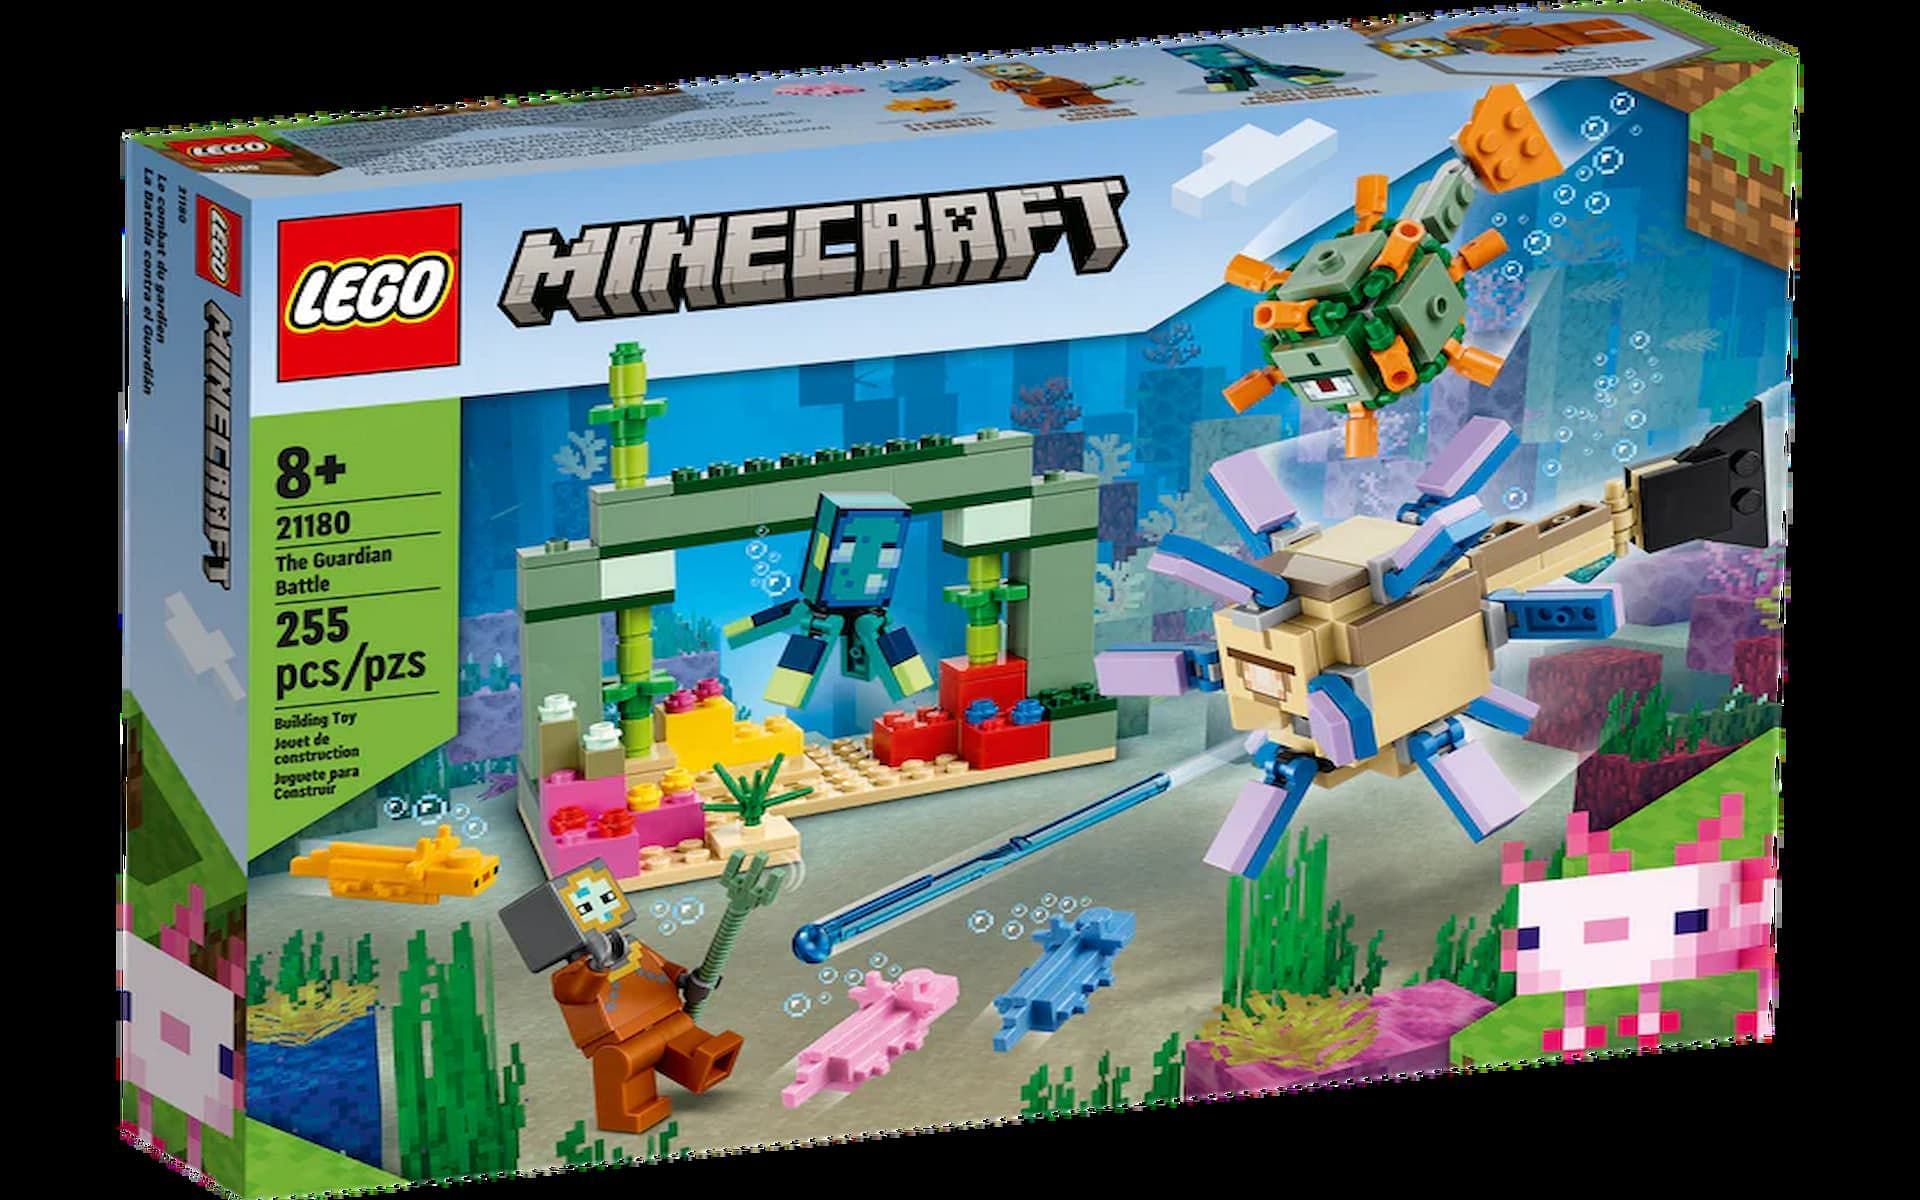 Fans of the game can pick up some amazing toys, including this LEGO set (Image via LEGO)